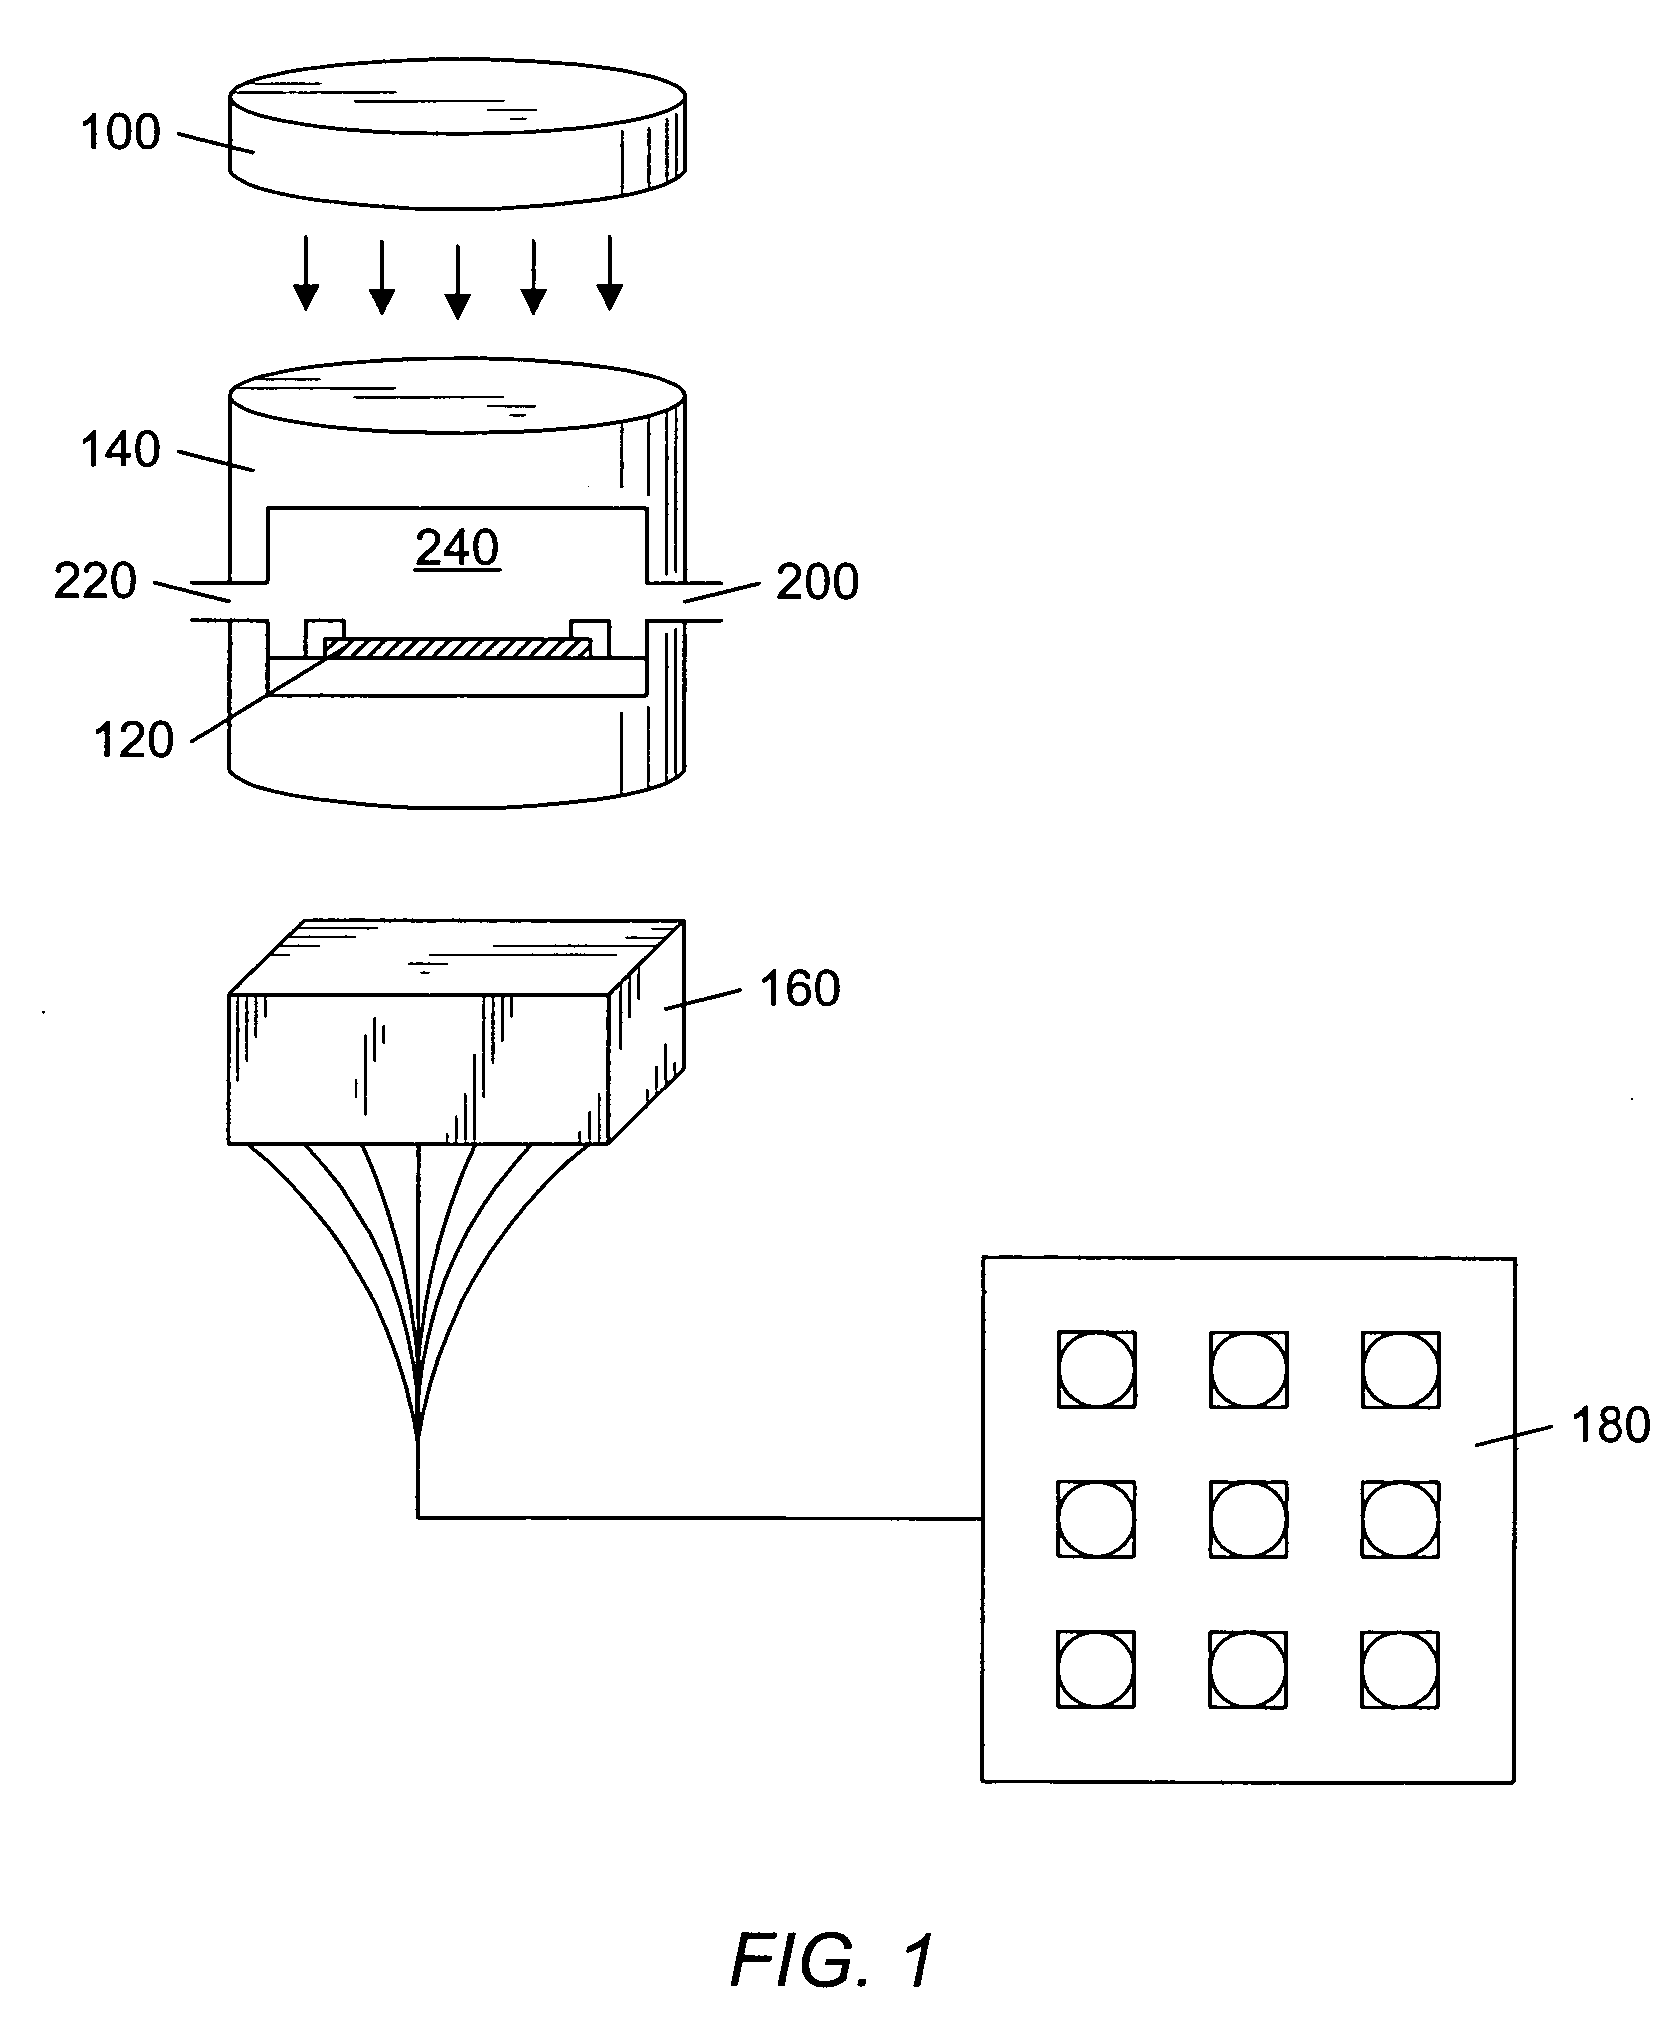 Method and system for the analysis of saliva using a sensor array